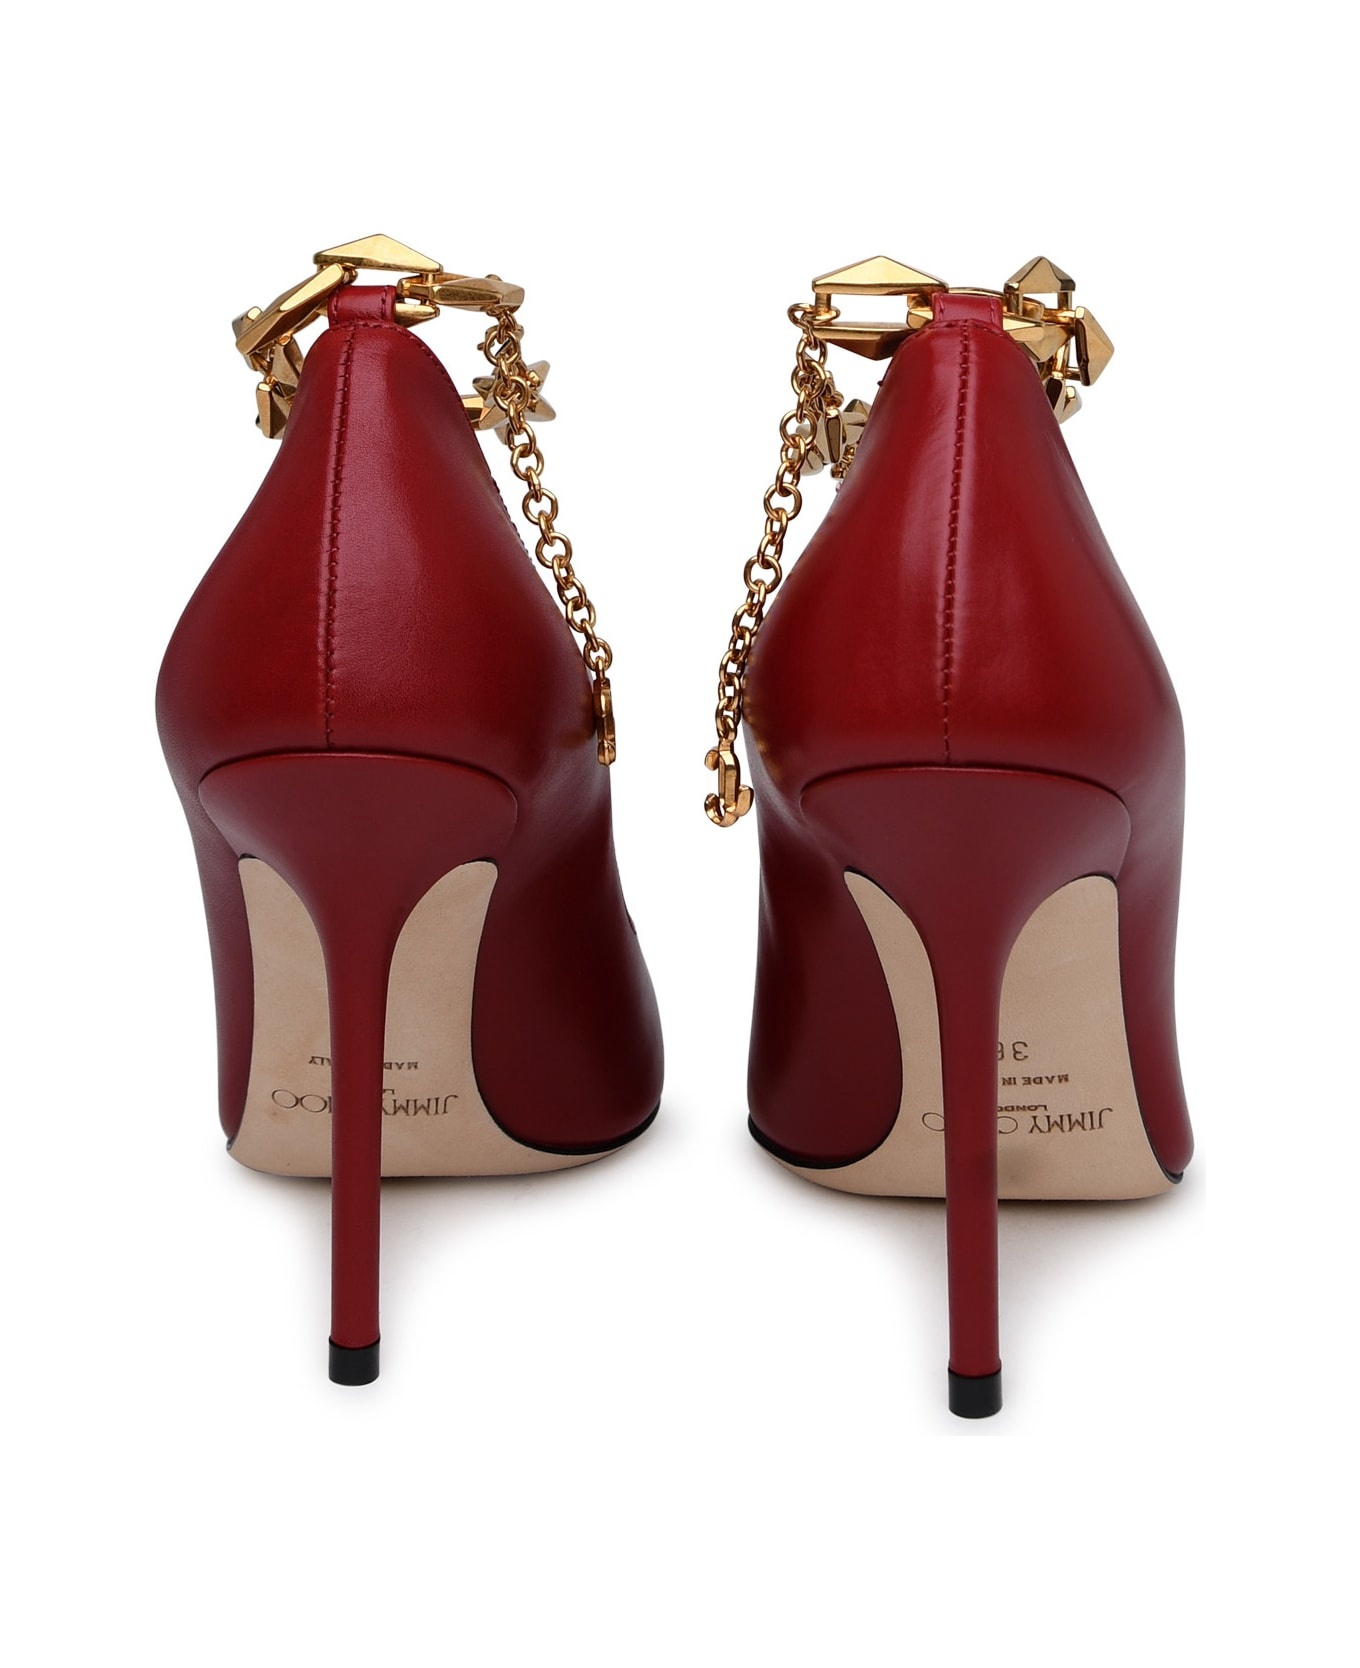 Diamond Pumps In Red Leather - 4